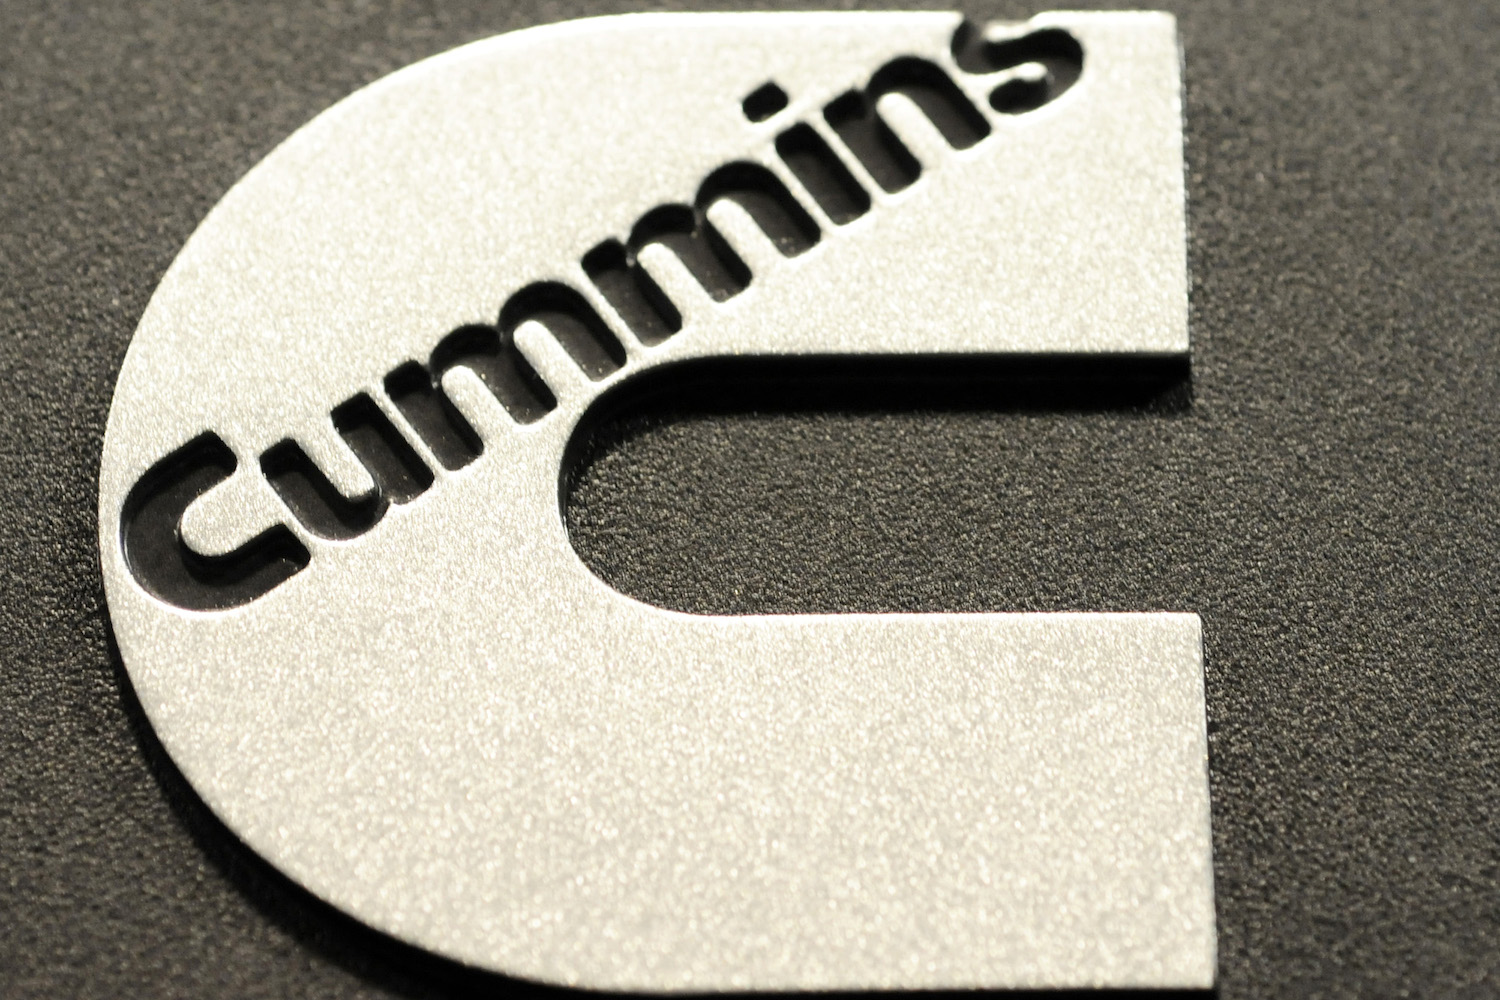 Closeup of a shiny Cummins logo at the company's Waterloo Indiana Army turbo diesel engine factory.